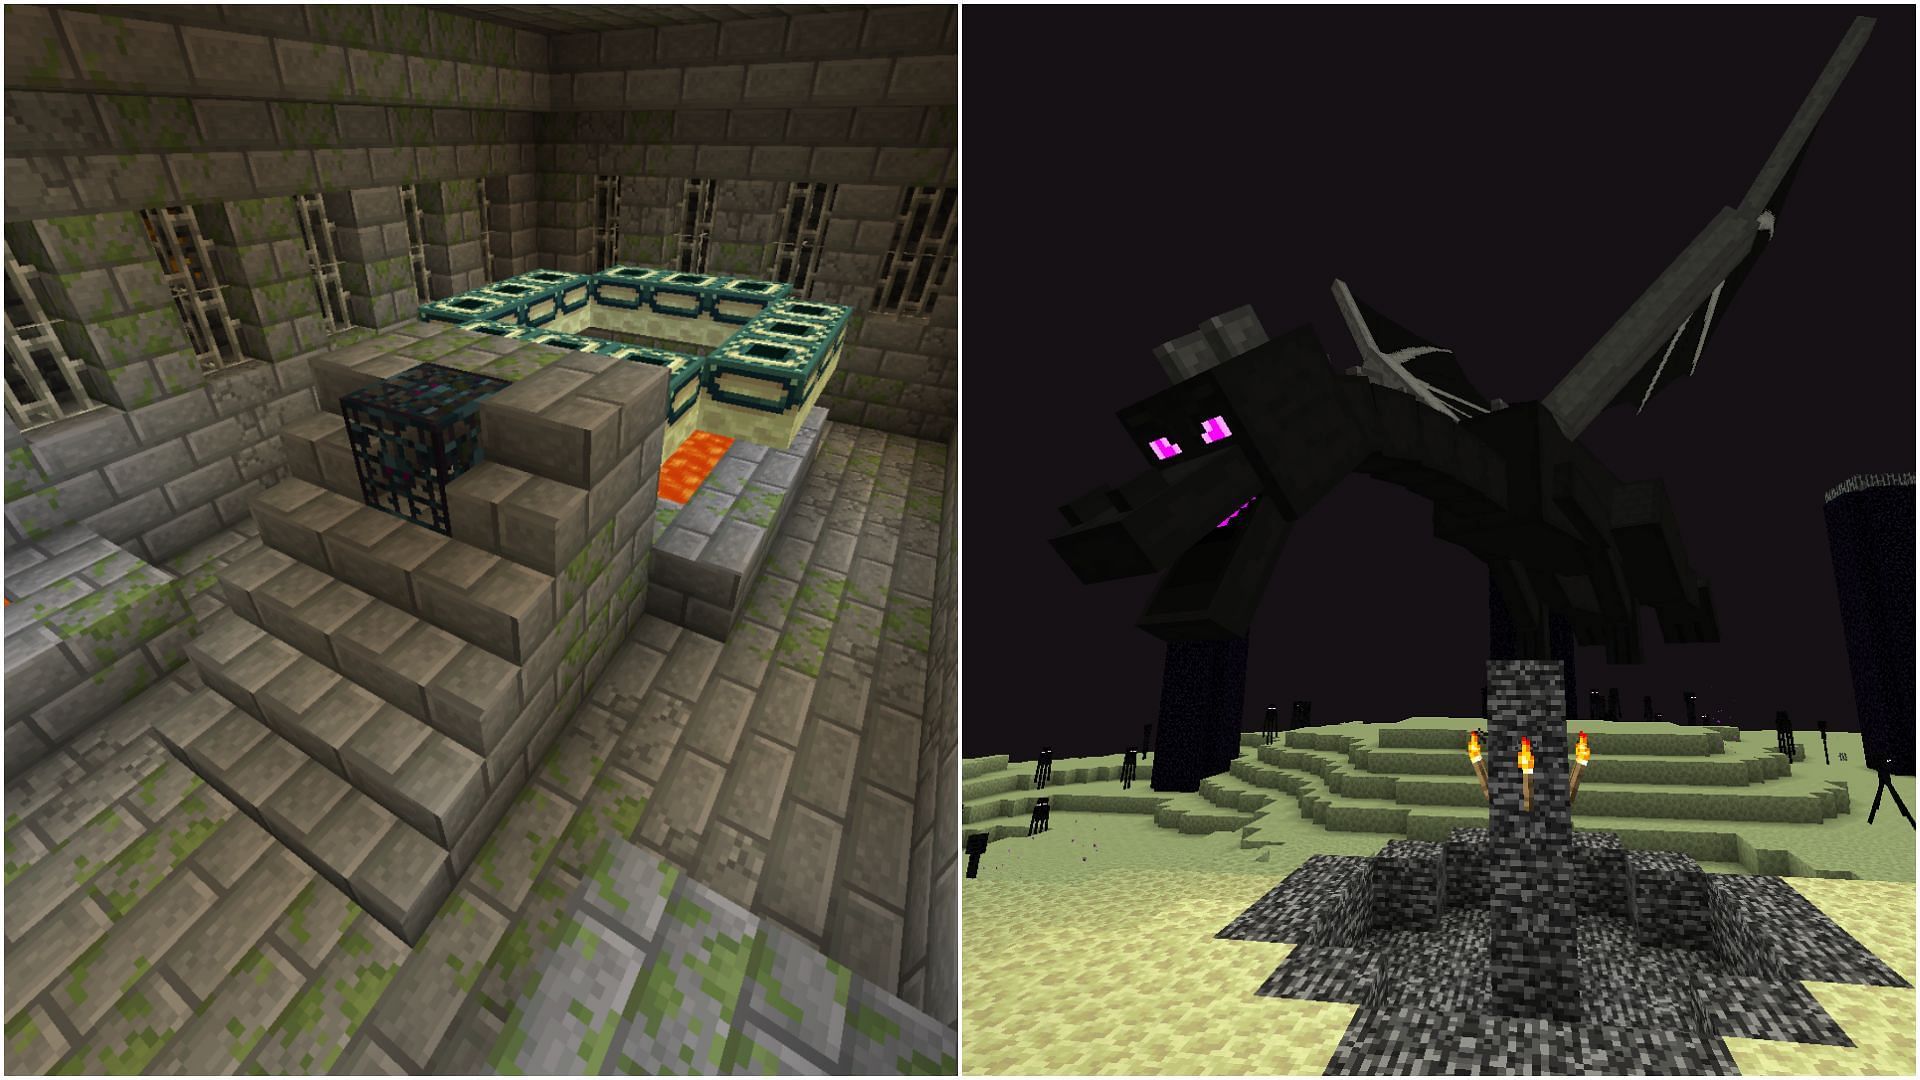 End Guide: How to Reach the End and Defeat the Ender Dragon